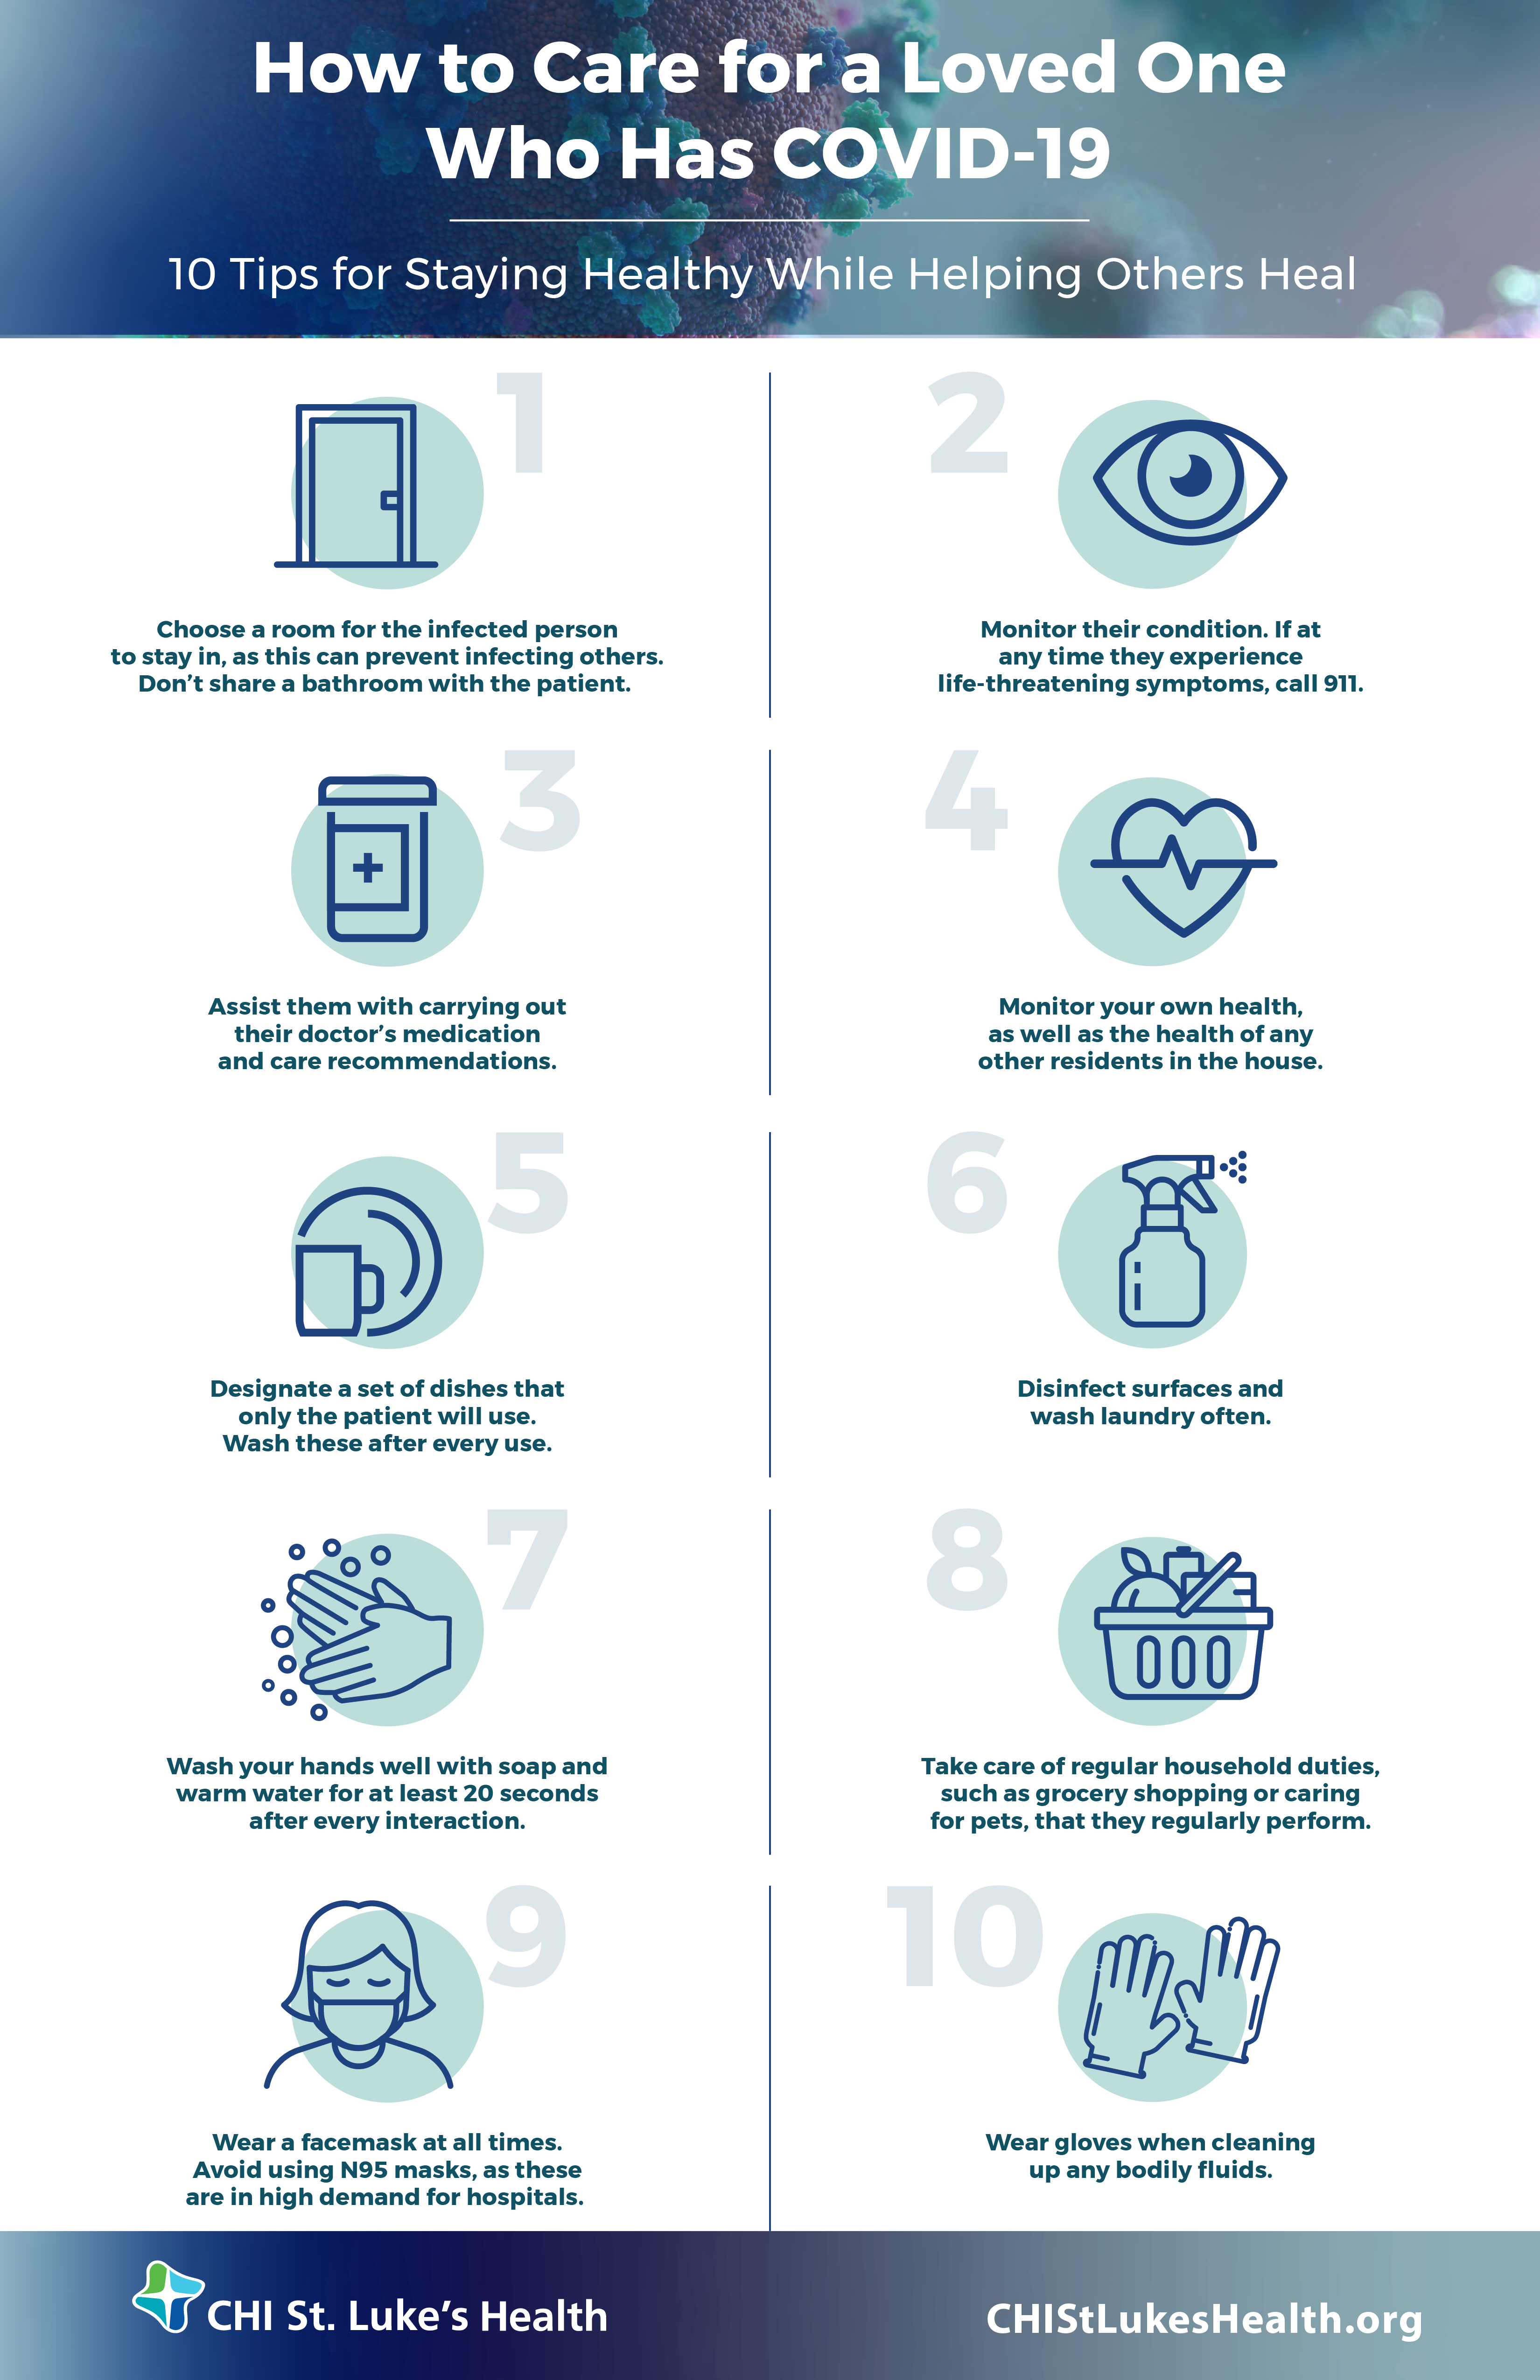 How to Care for a Loved One With COVID-19 Infographic